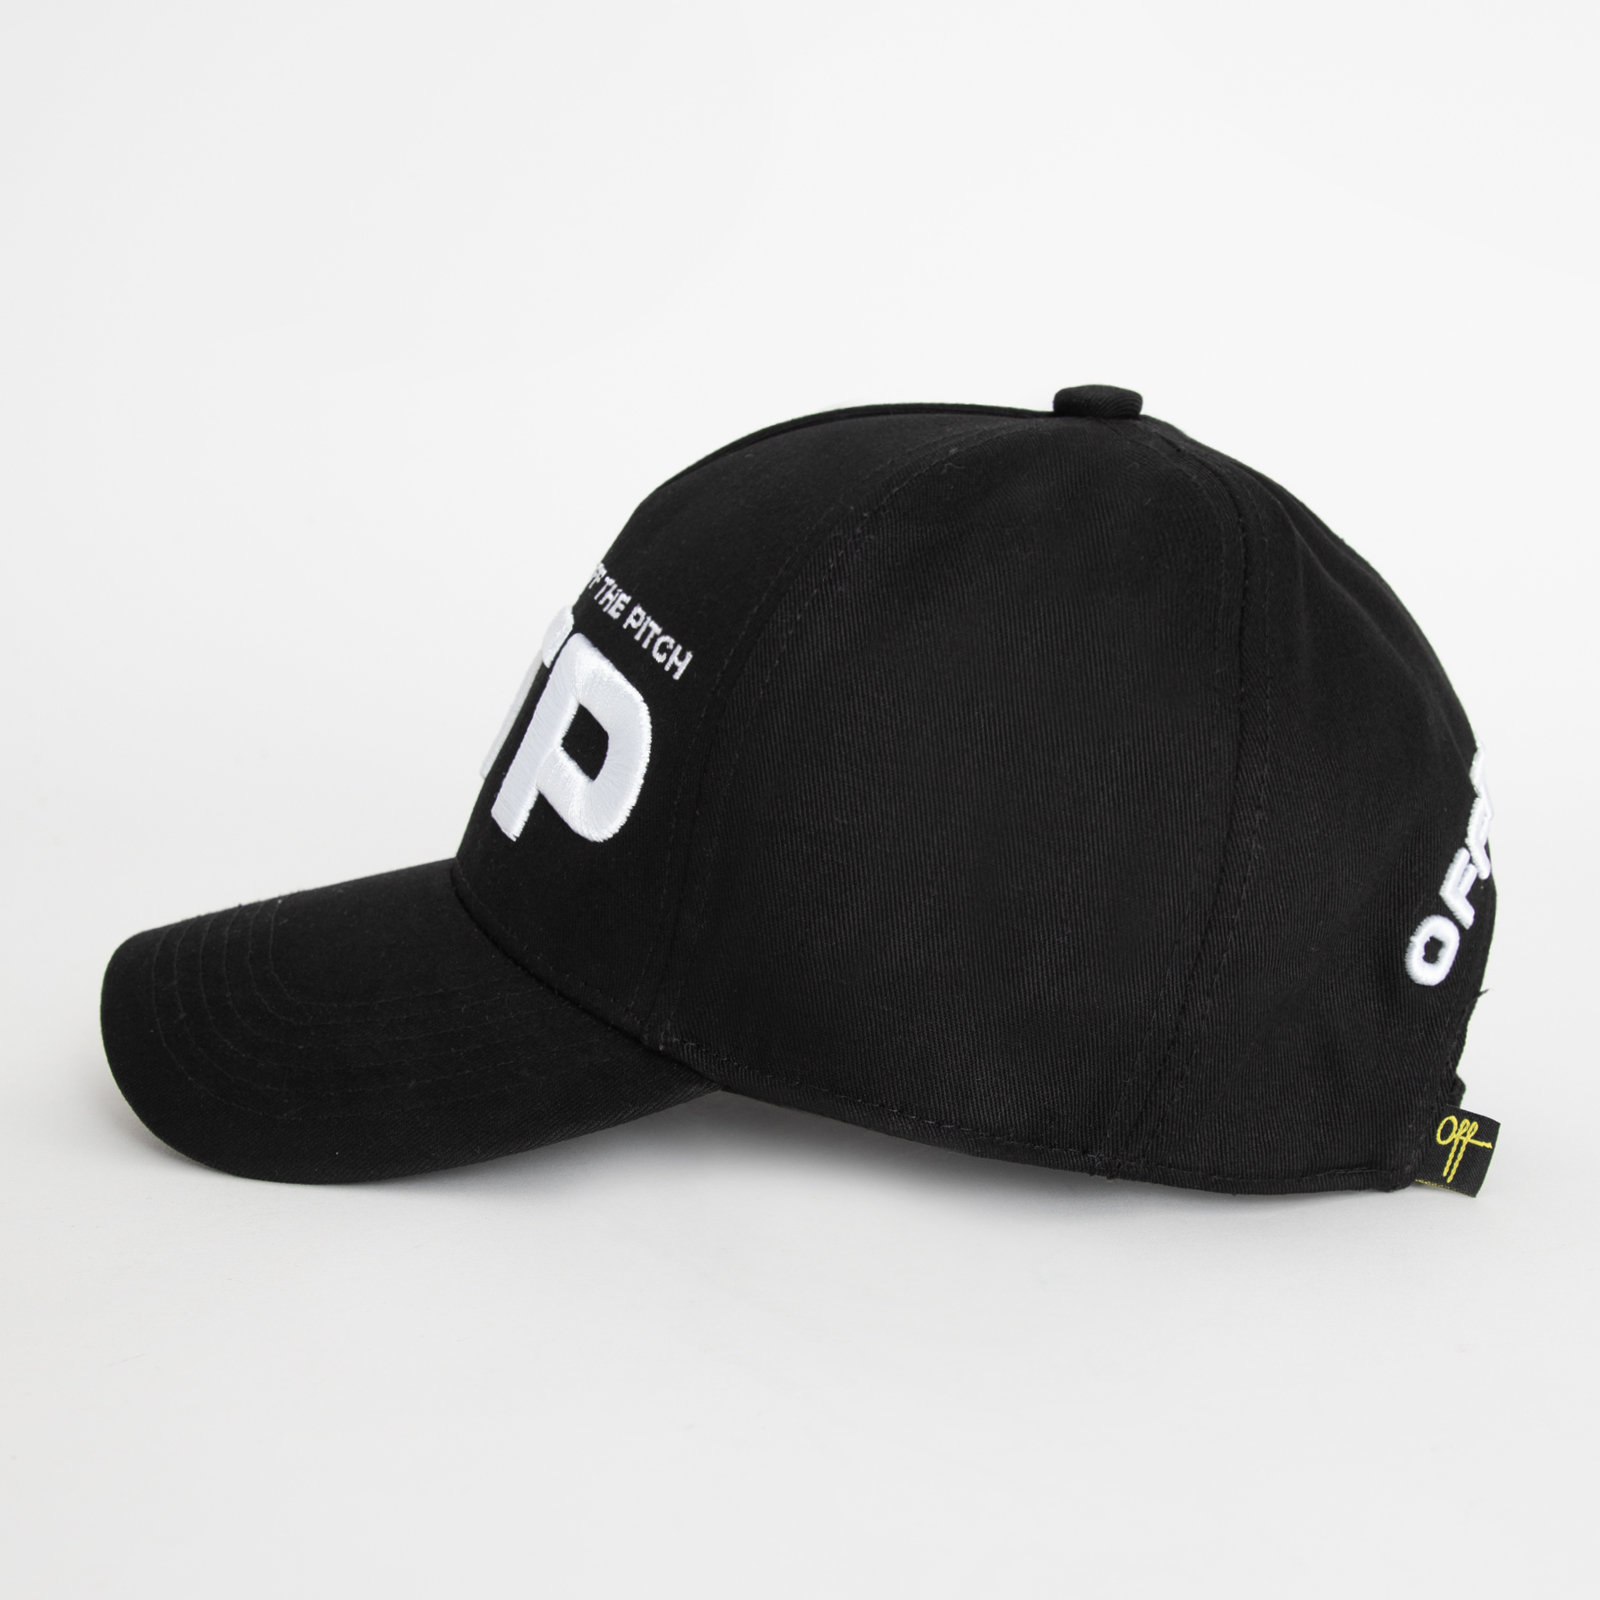 Off the Pitch Off-set Cap Black/White
